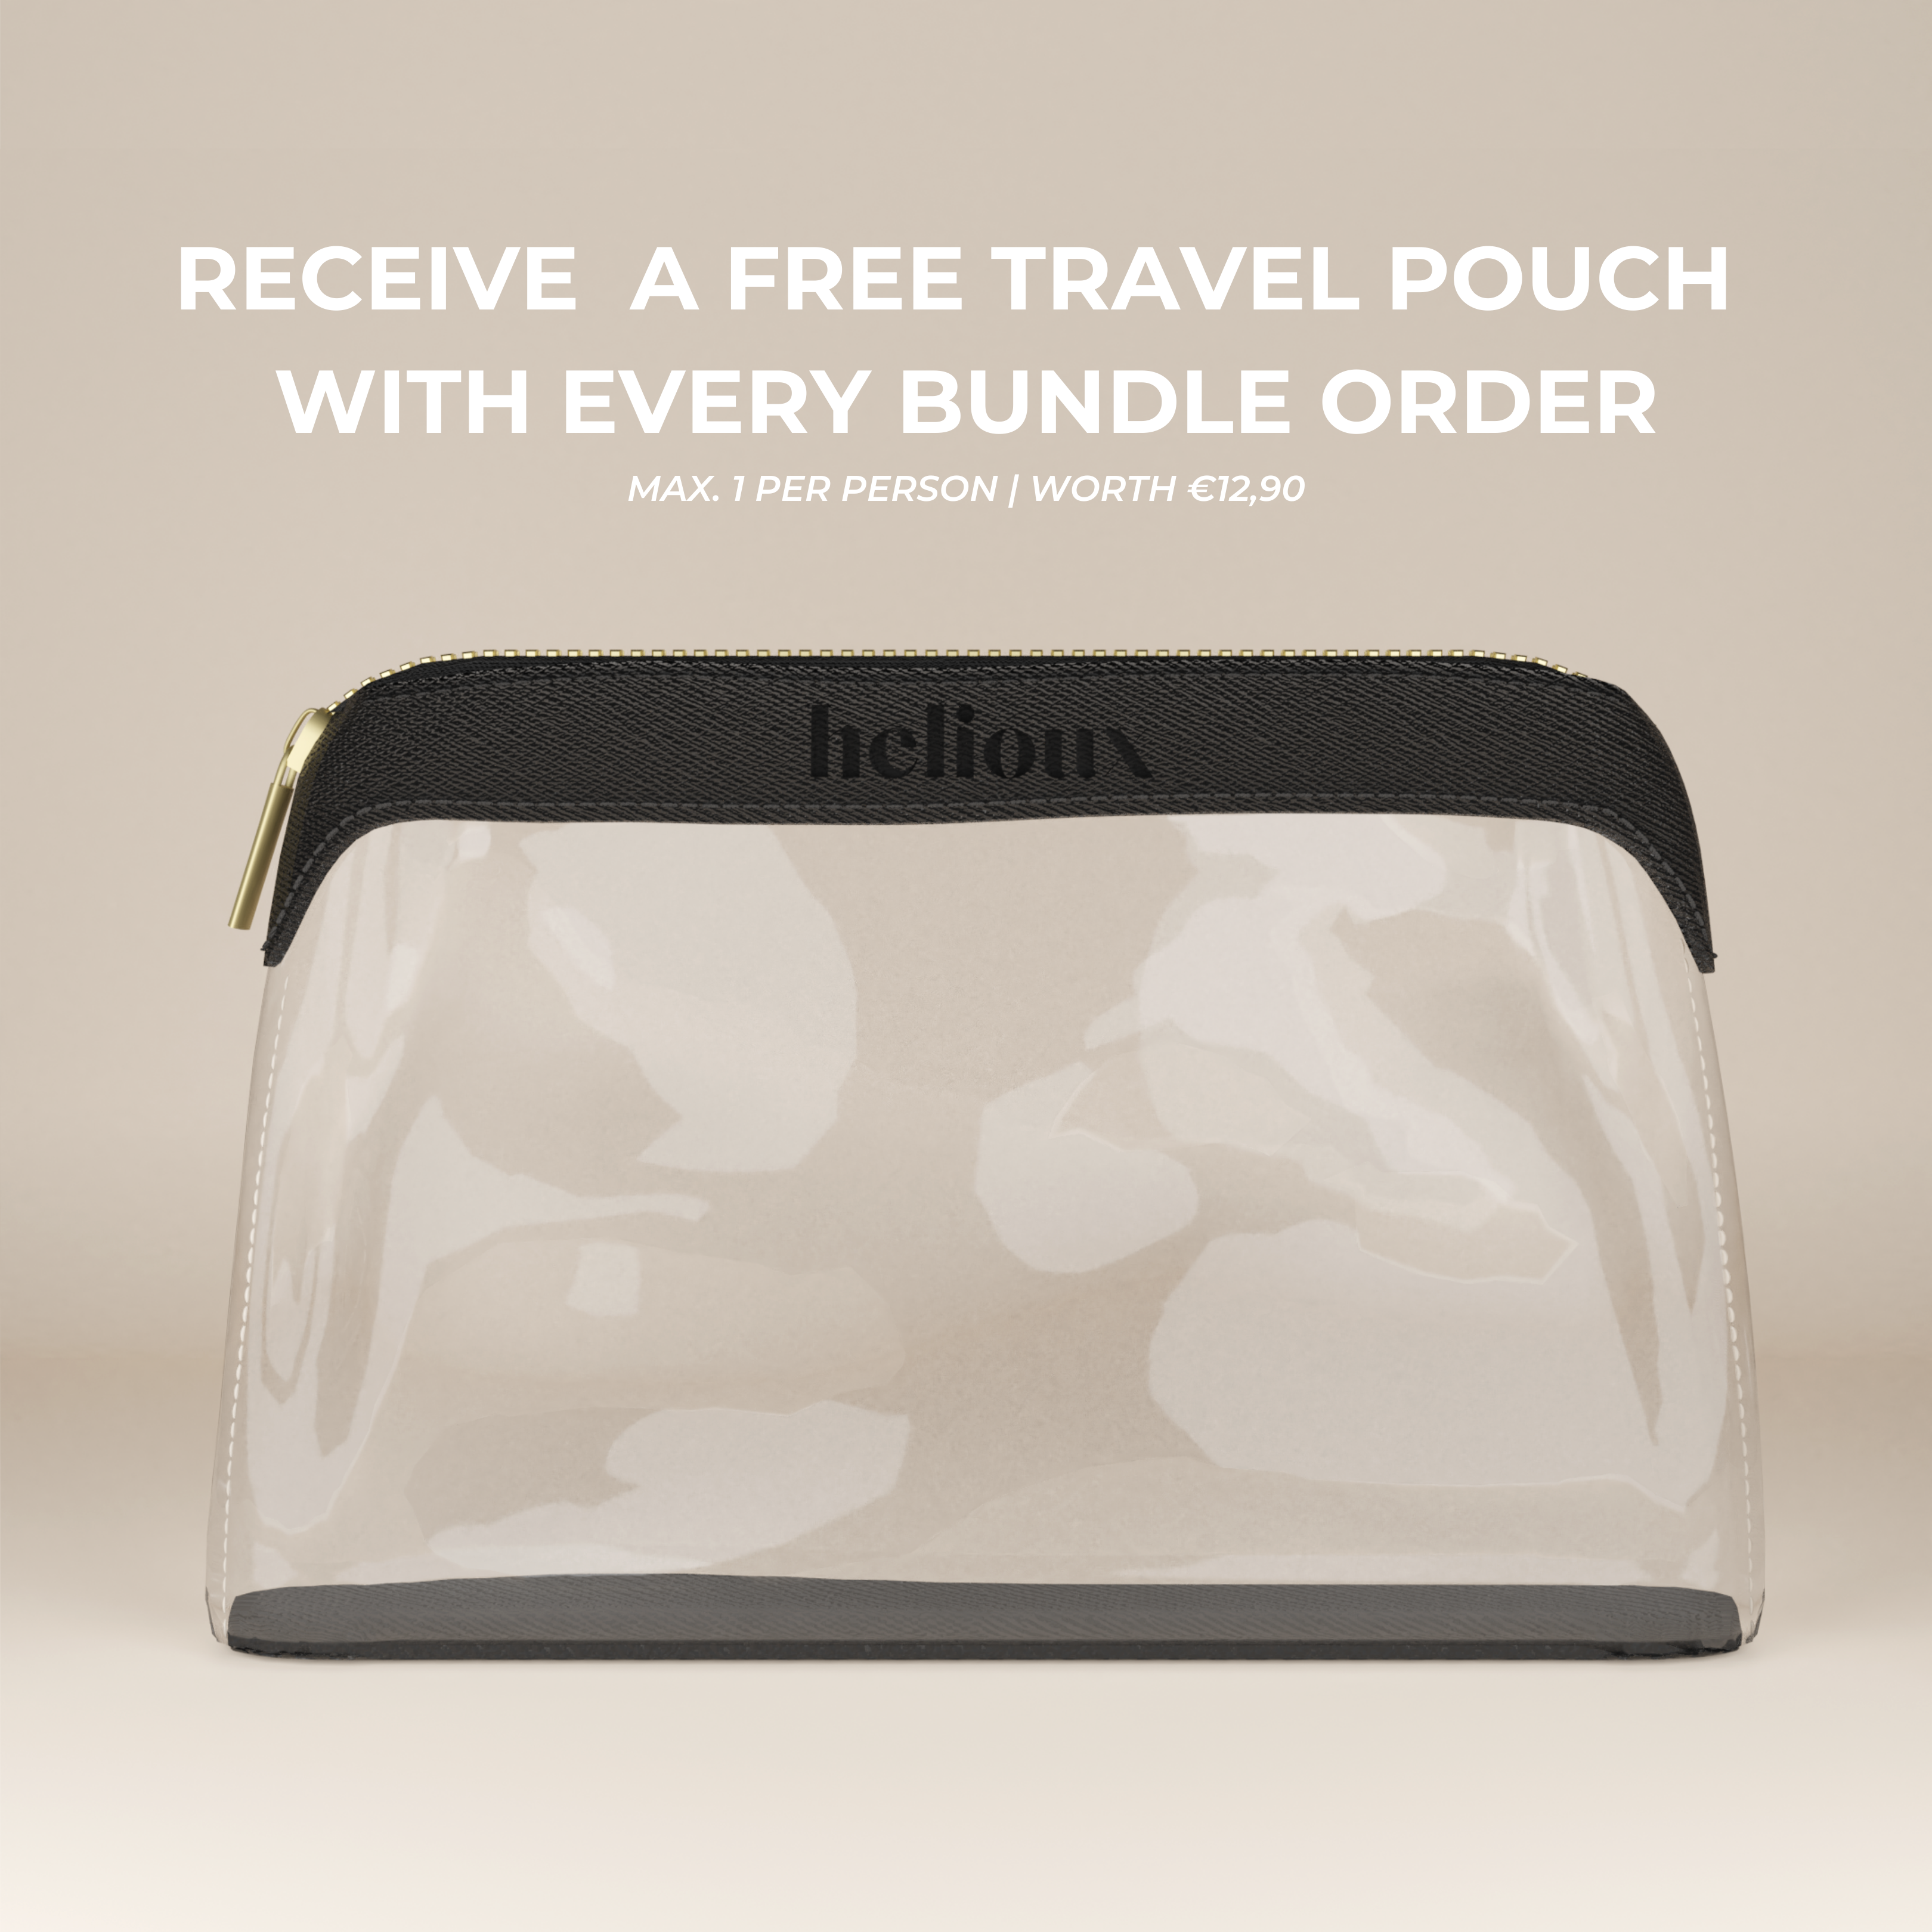 FREE TRAVEL POUCH - ONLY WITH BUNDLES